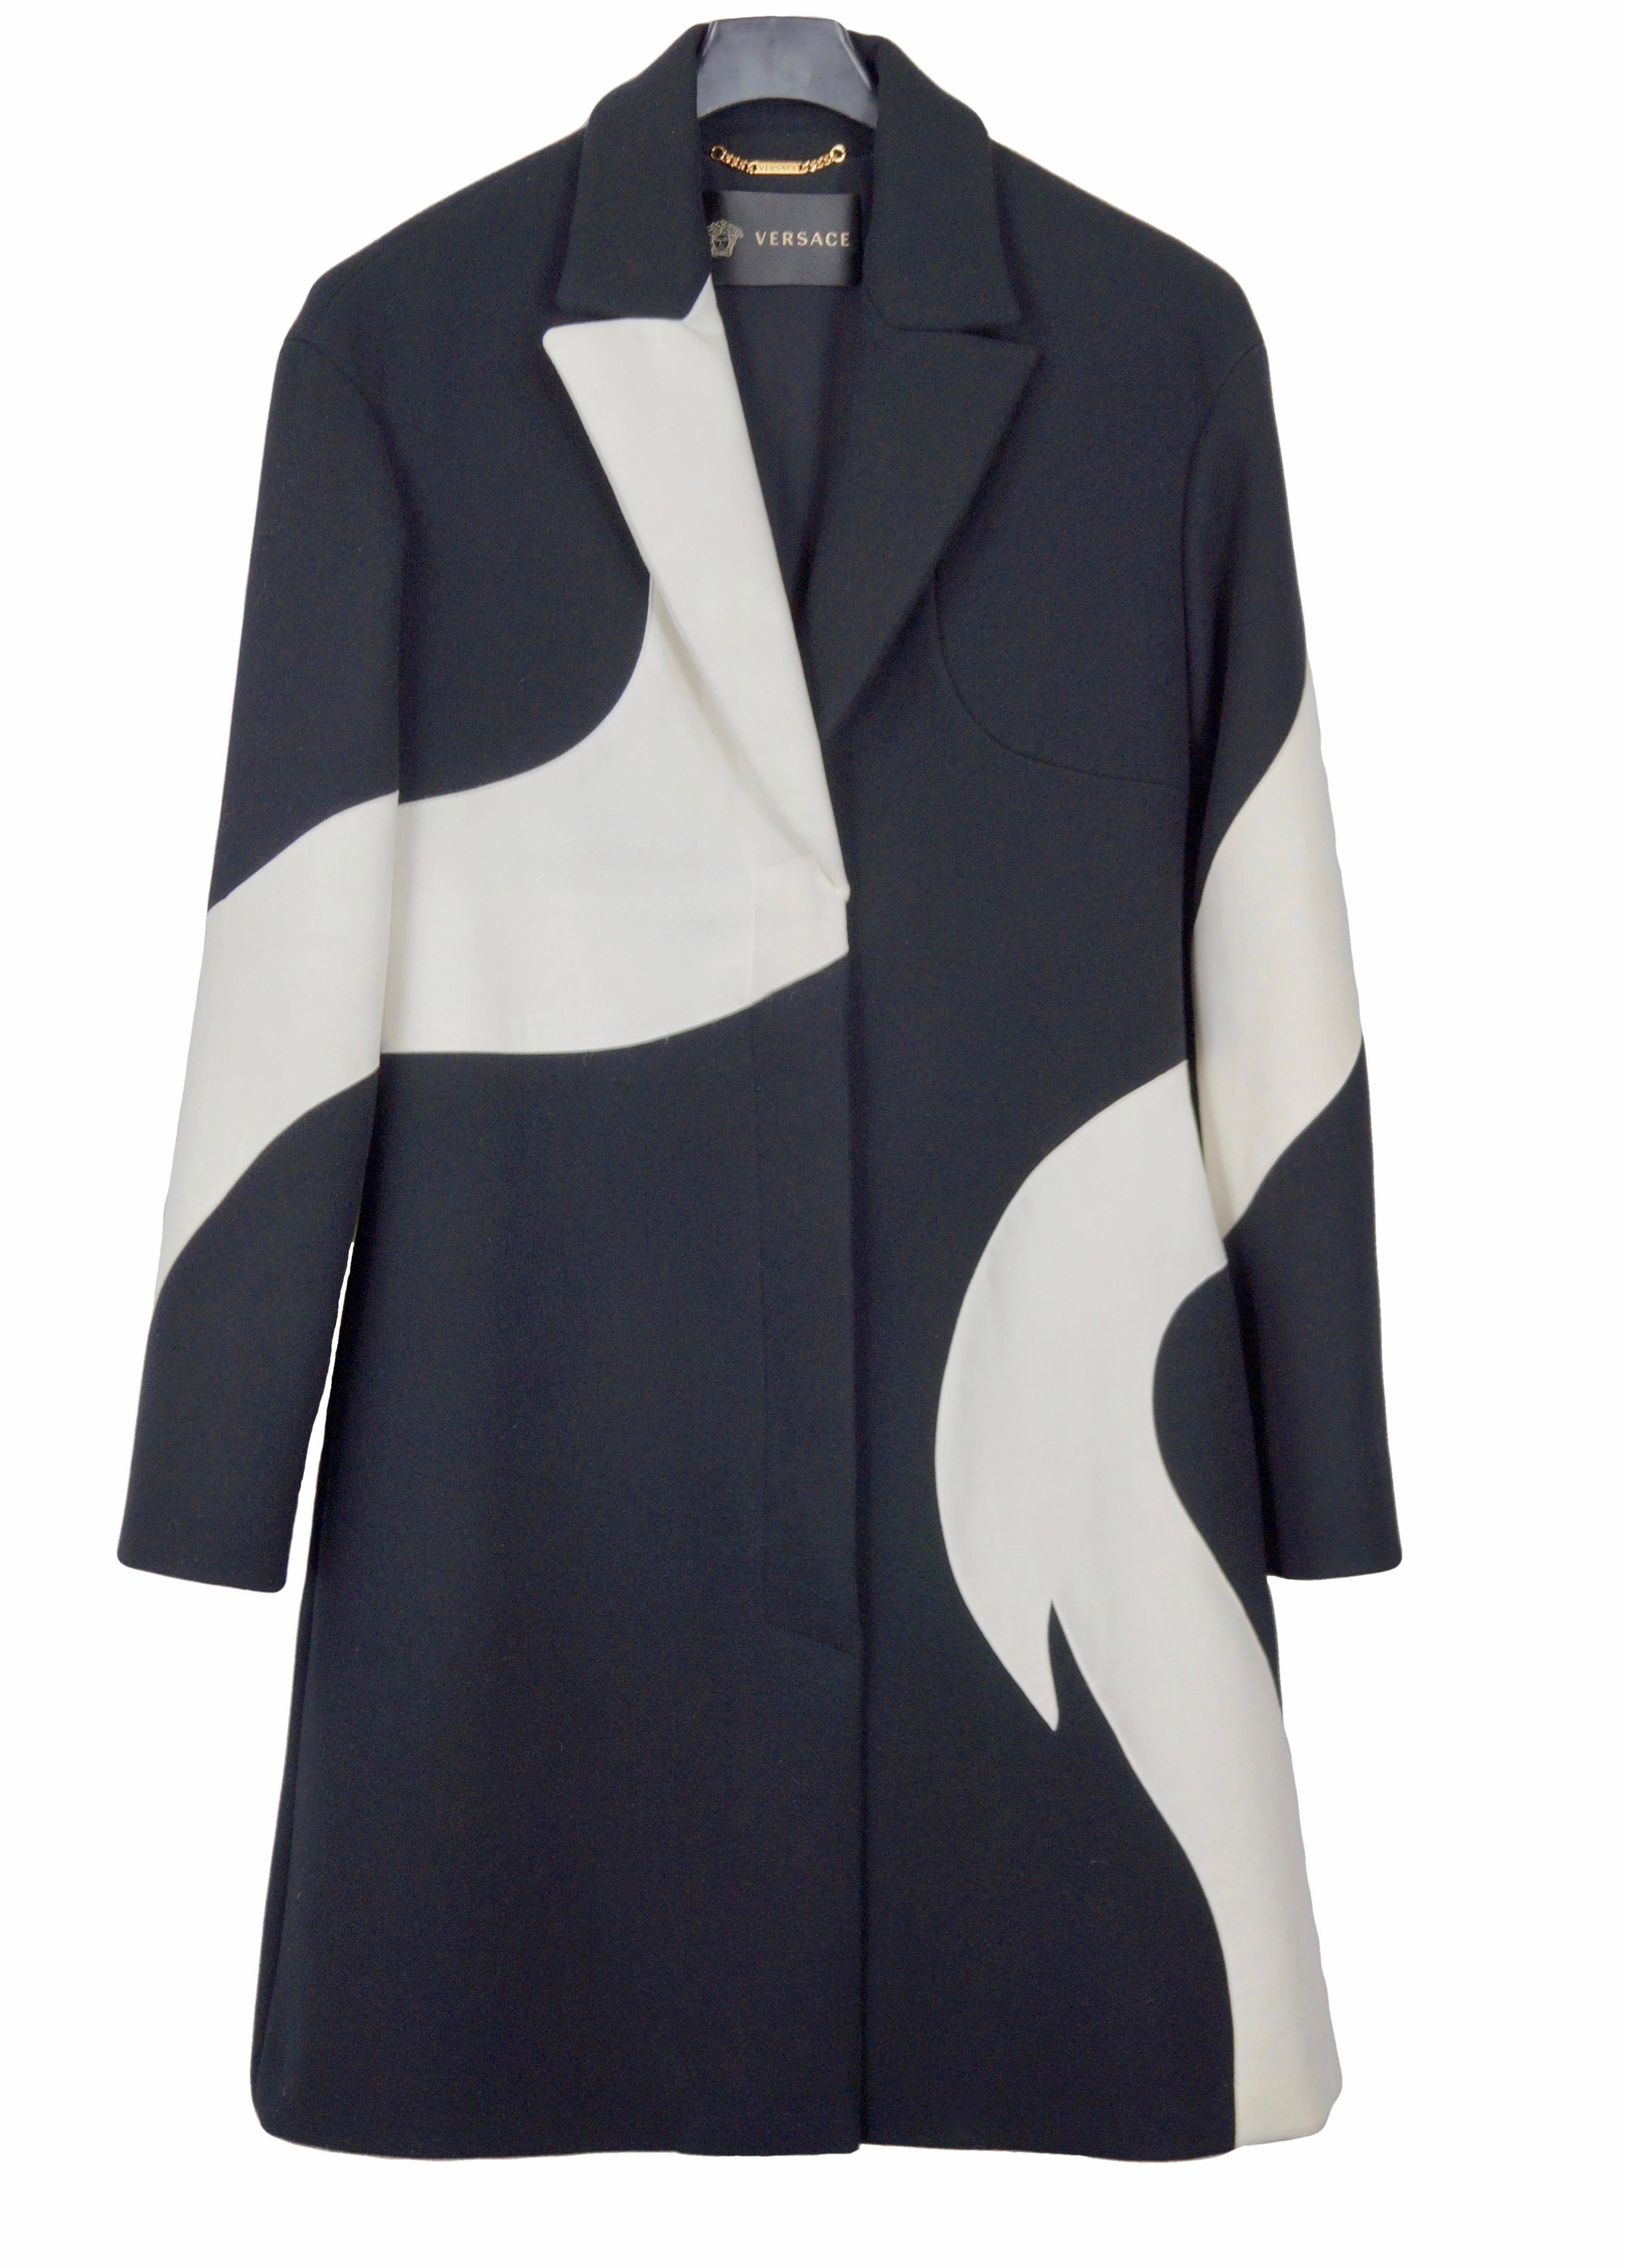 VERSACE coat and dress black and white F/W 2011 For Sale 1